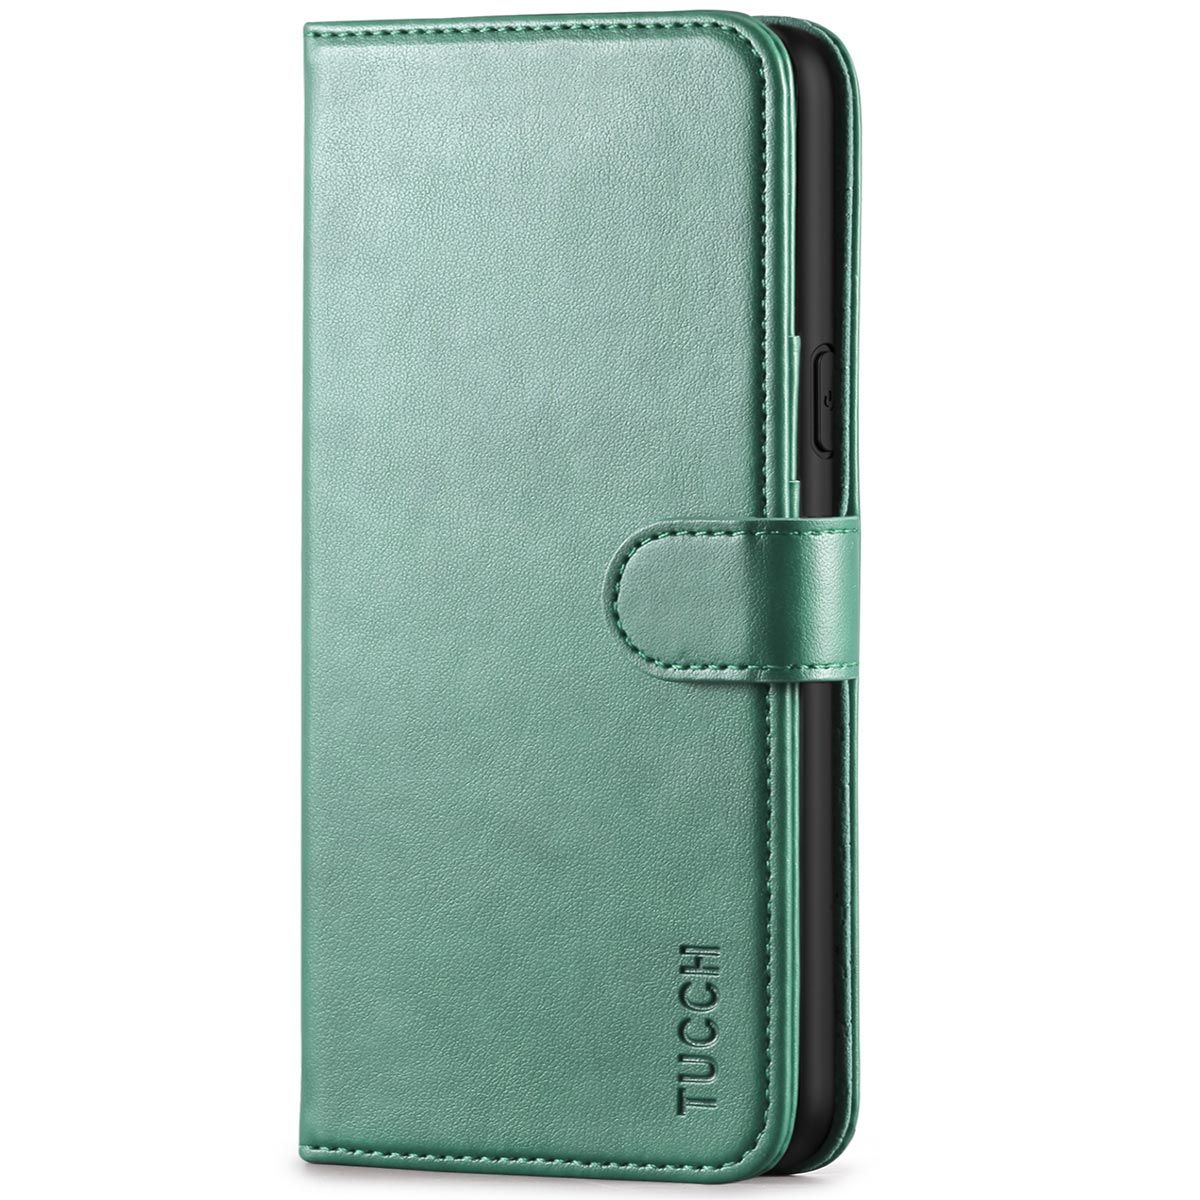 TECH CIRCLE iPhone 11 case, Embossed Wallet Card Cash Slots PU Premium  Leather Magnetic Flip Kickstand Shockproof Cover for iPhone 11 6.1  inch,Green 